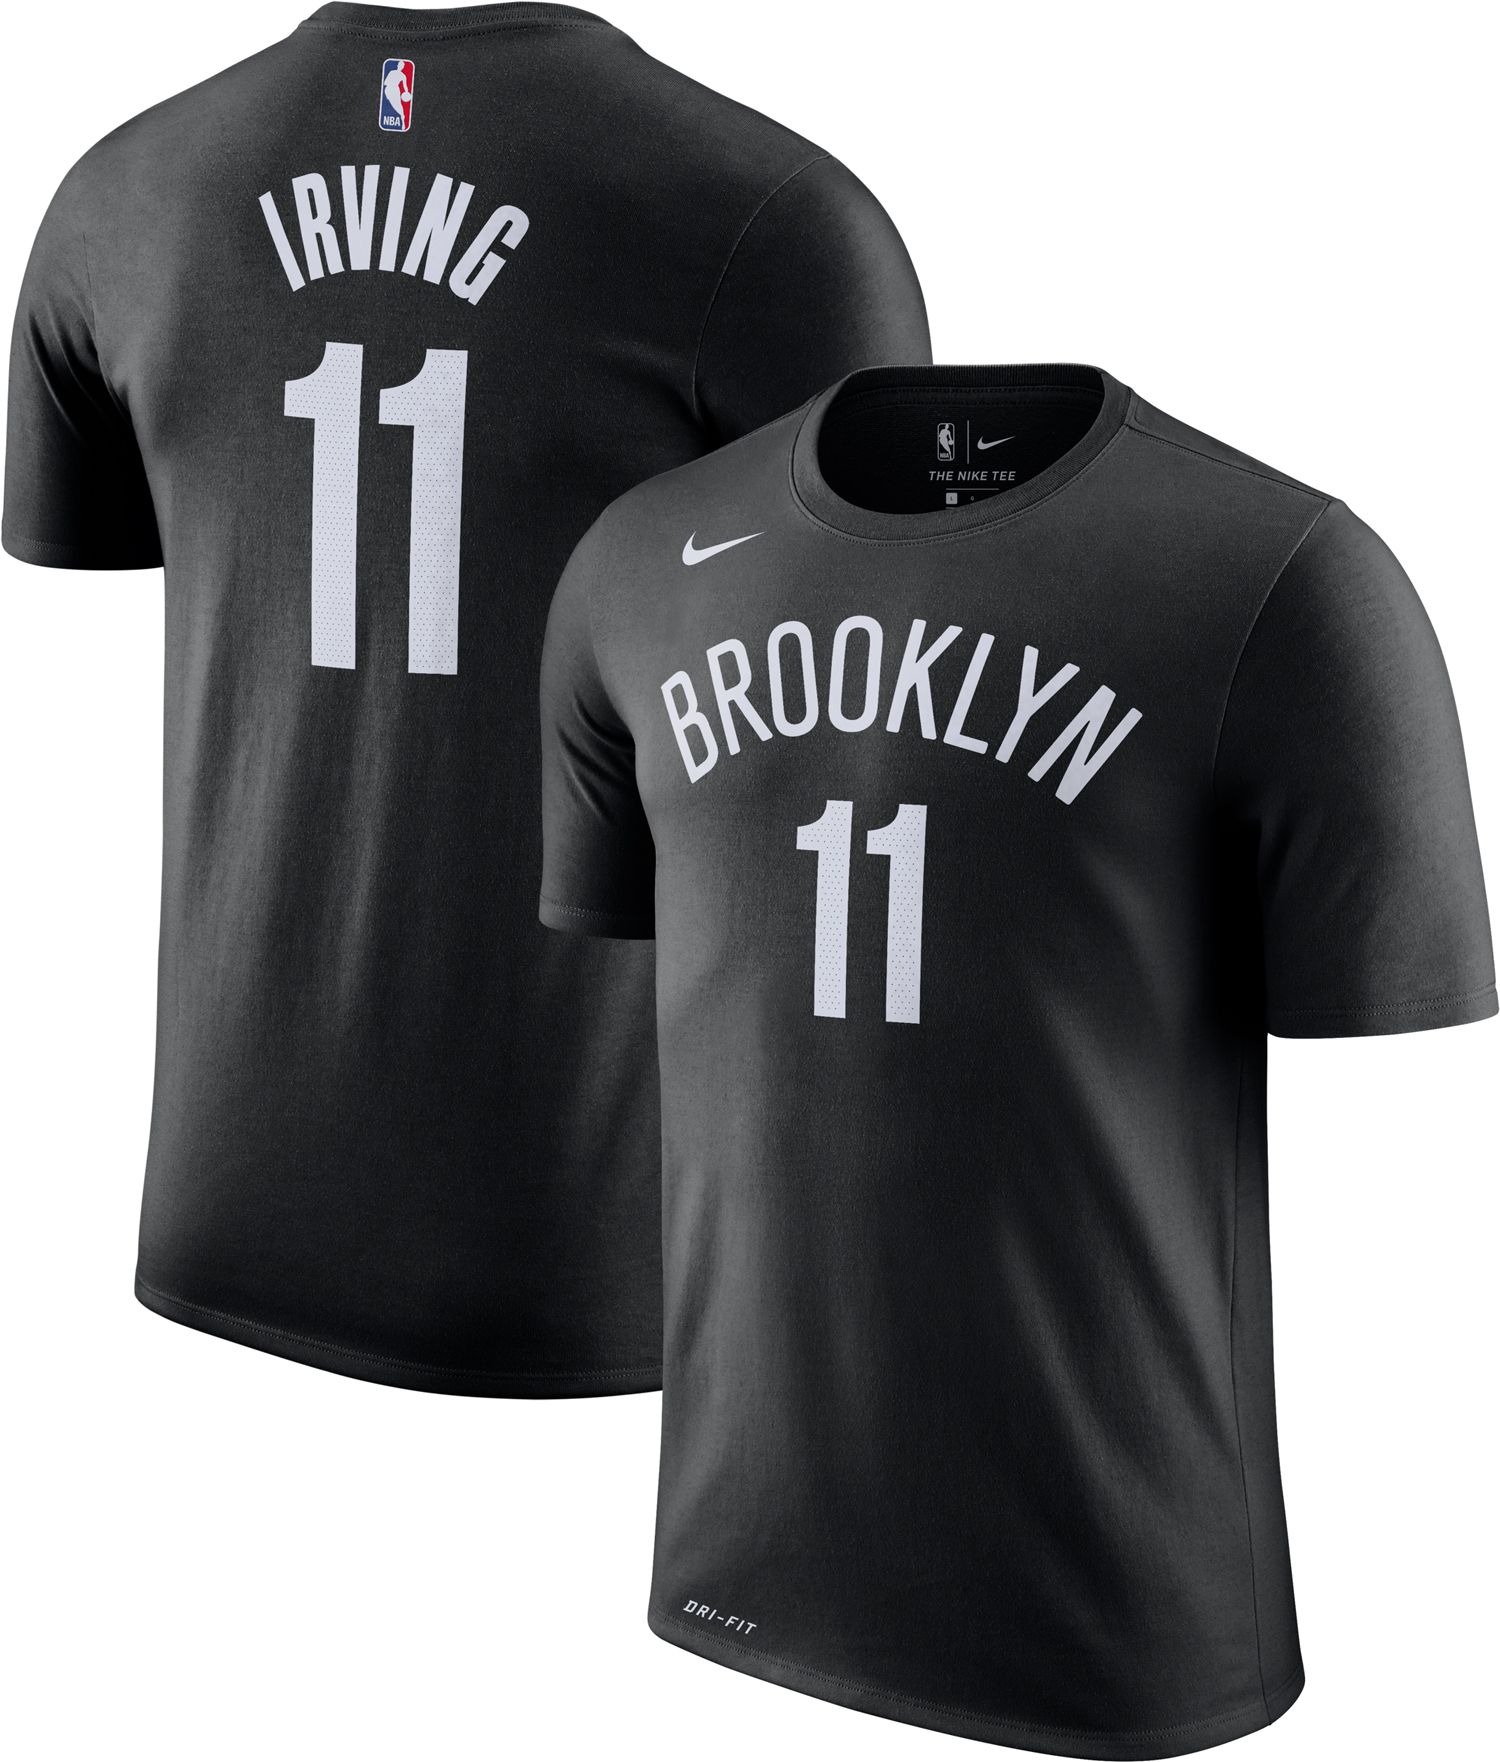 youth irving jersey